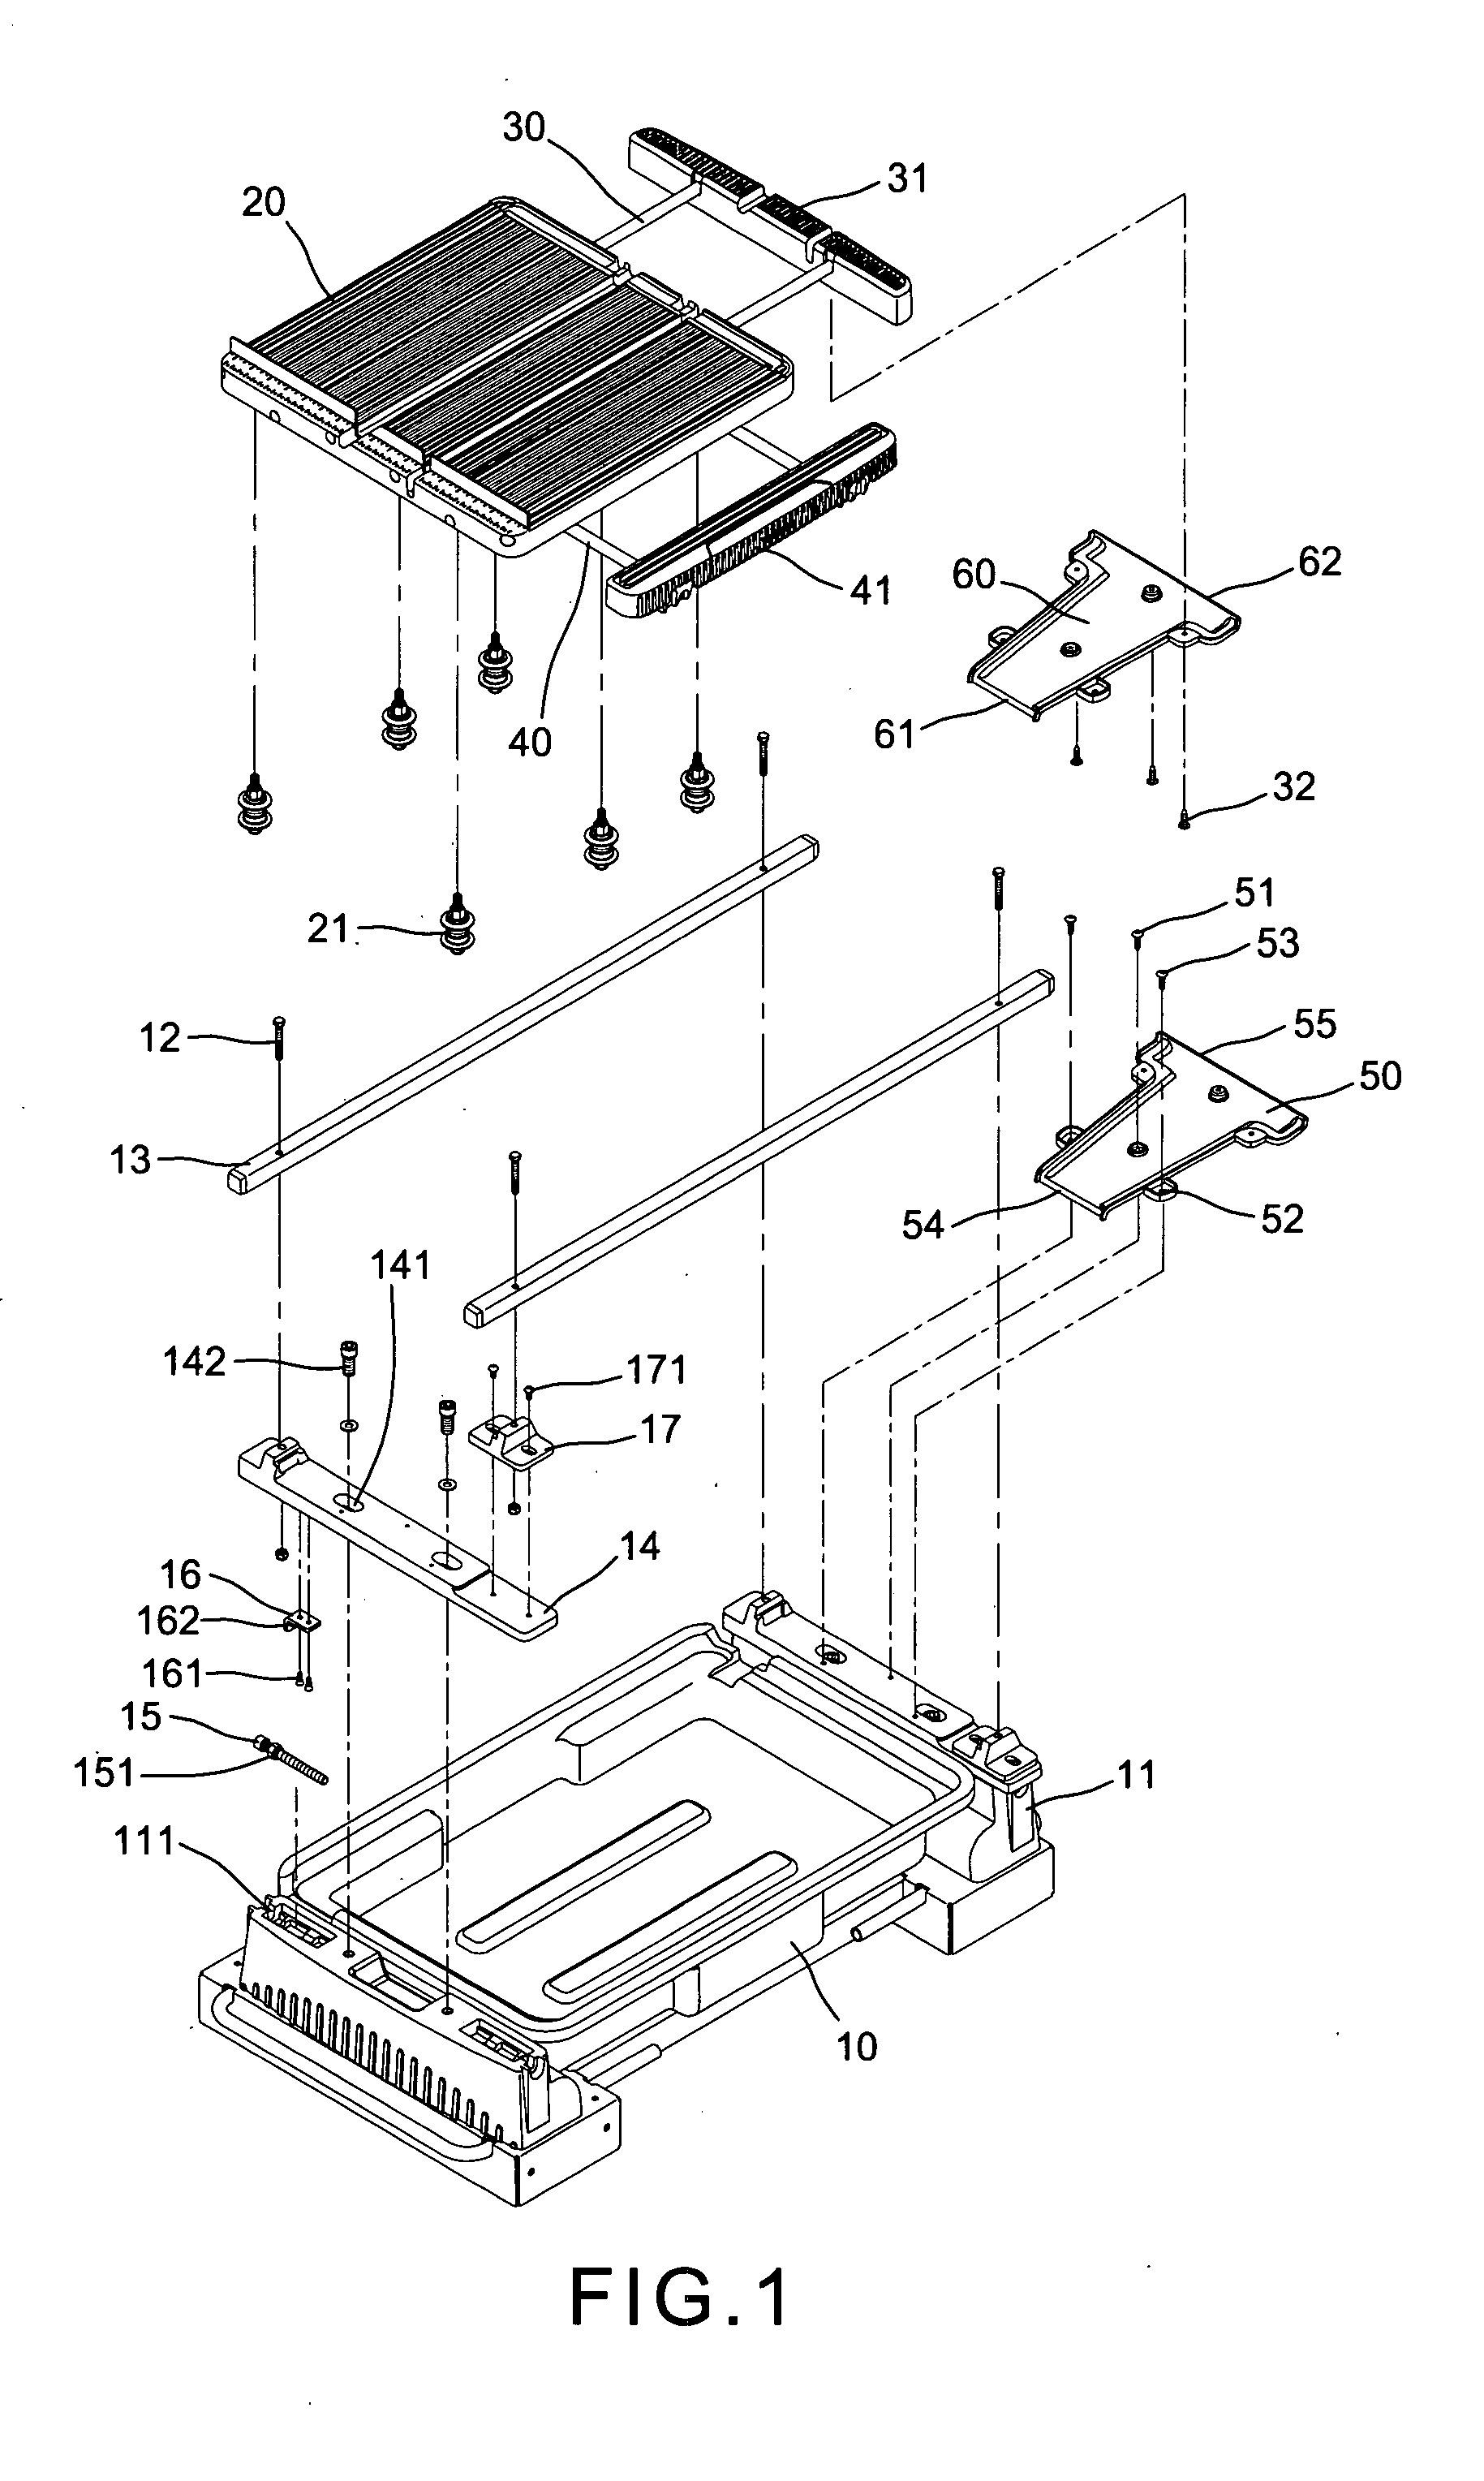 Platform minute adjustment, expansion and water collection devices